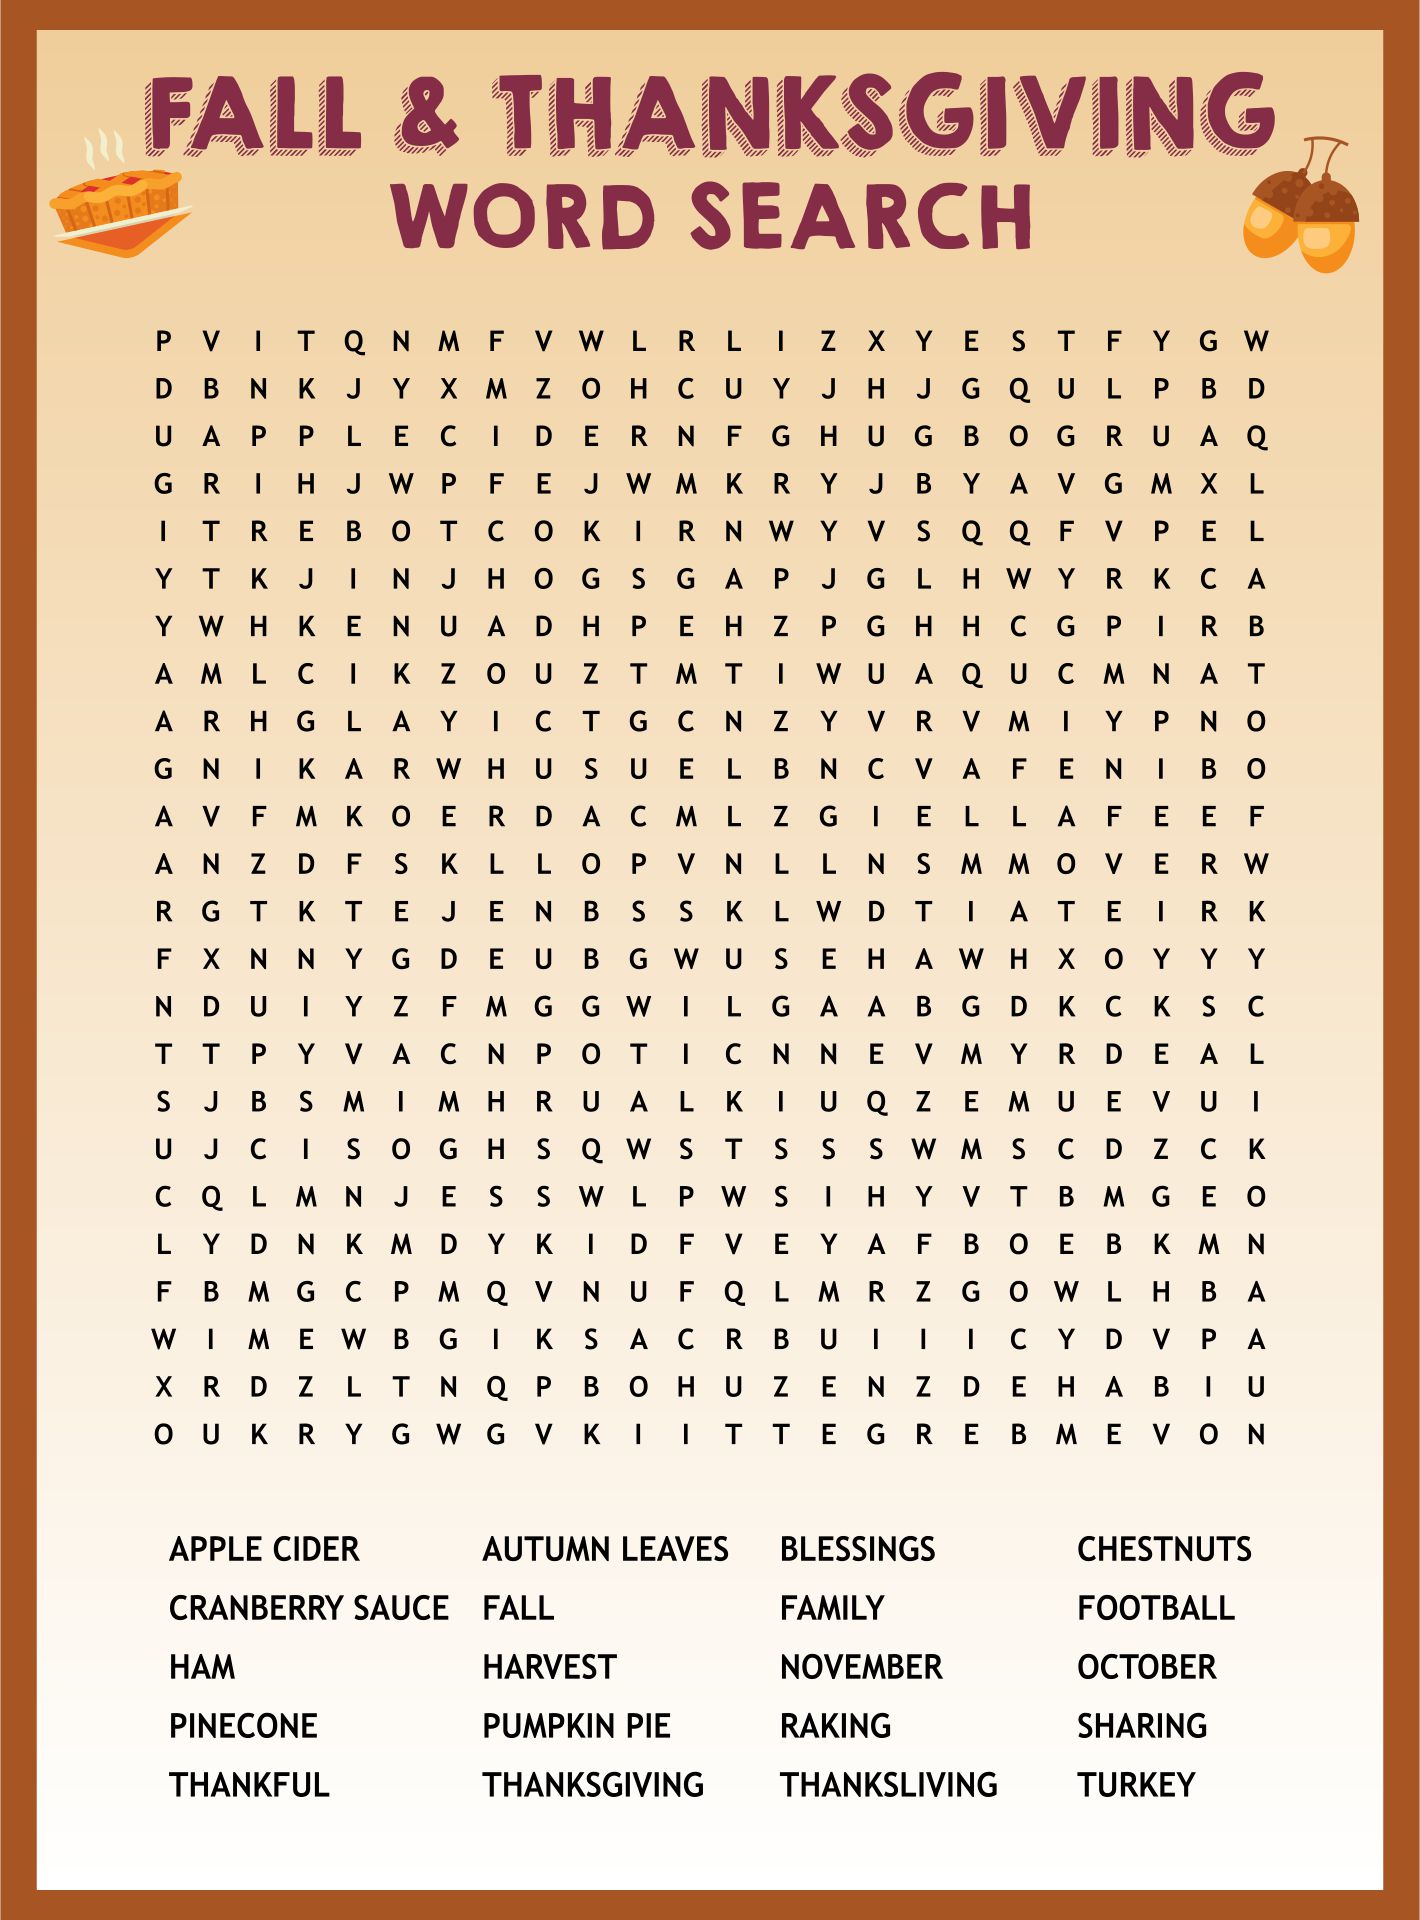 Fall & Thanksgiving Word Search Printable